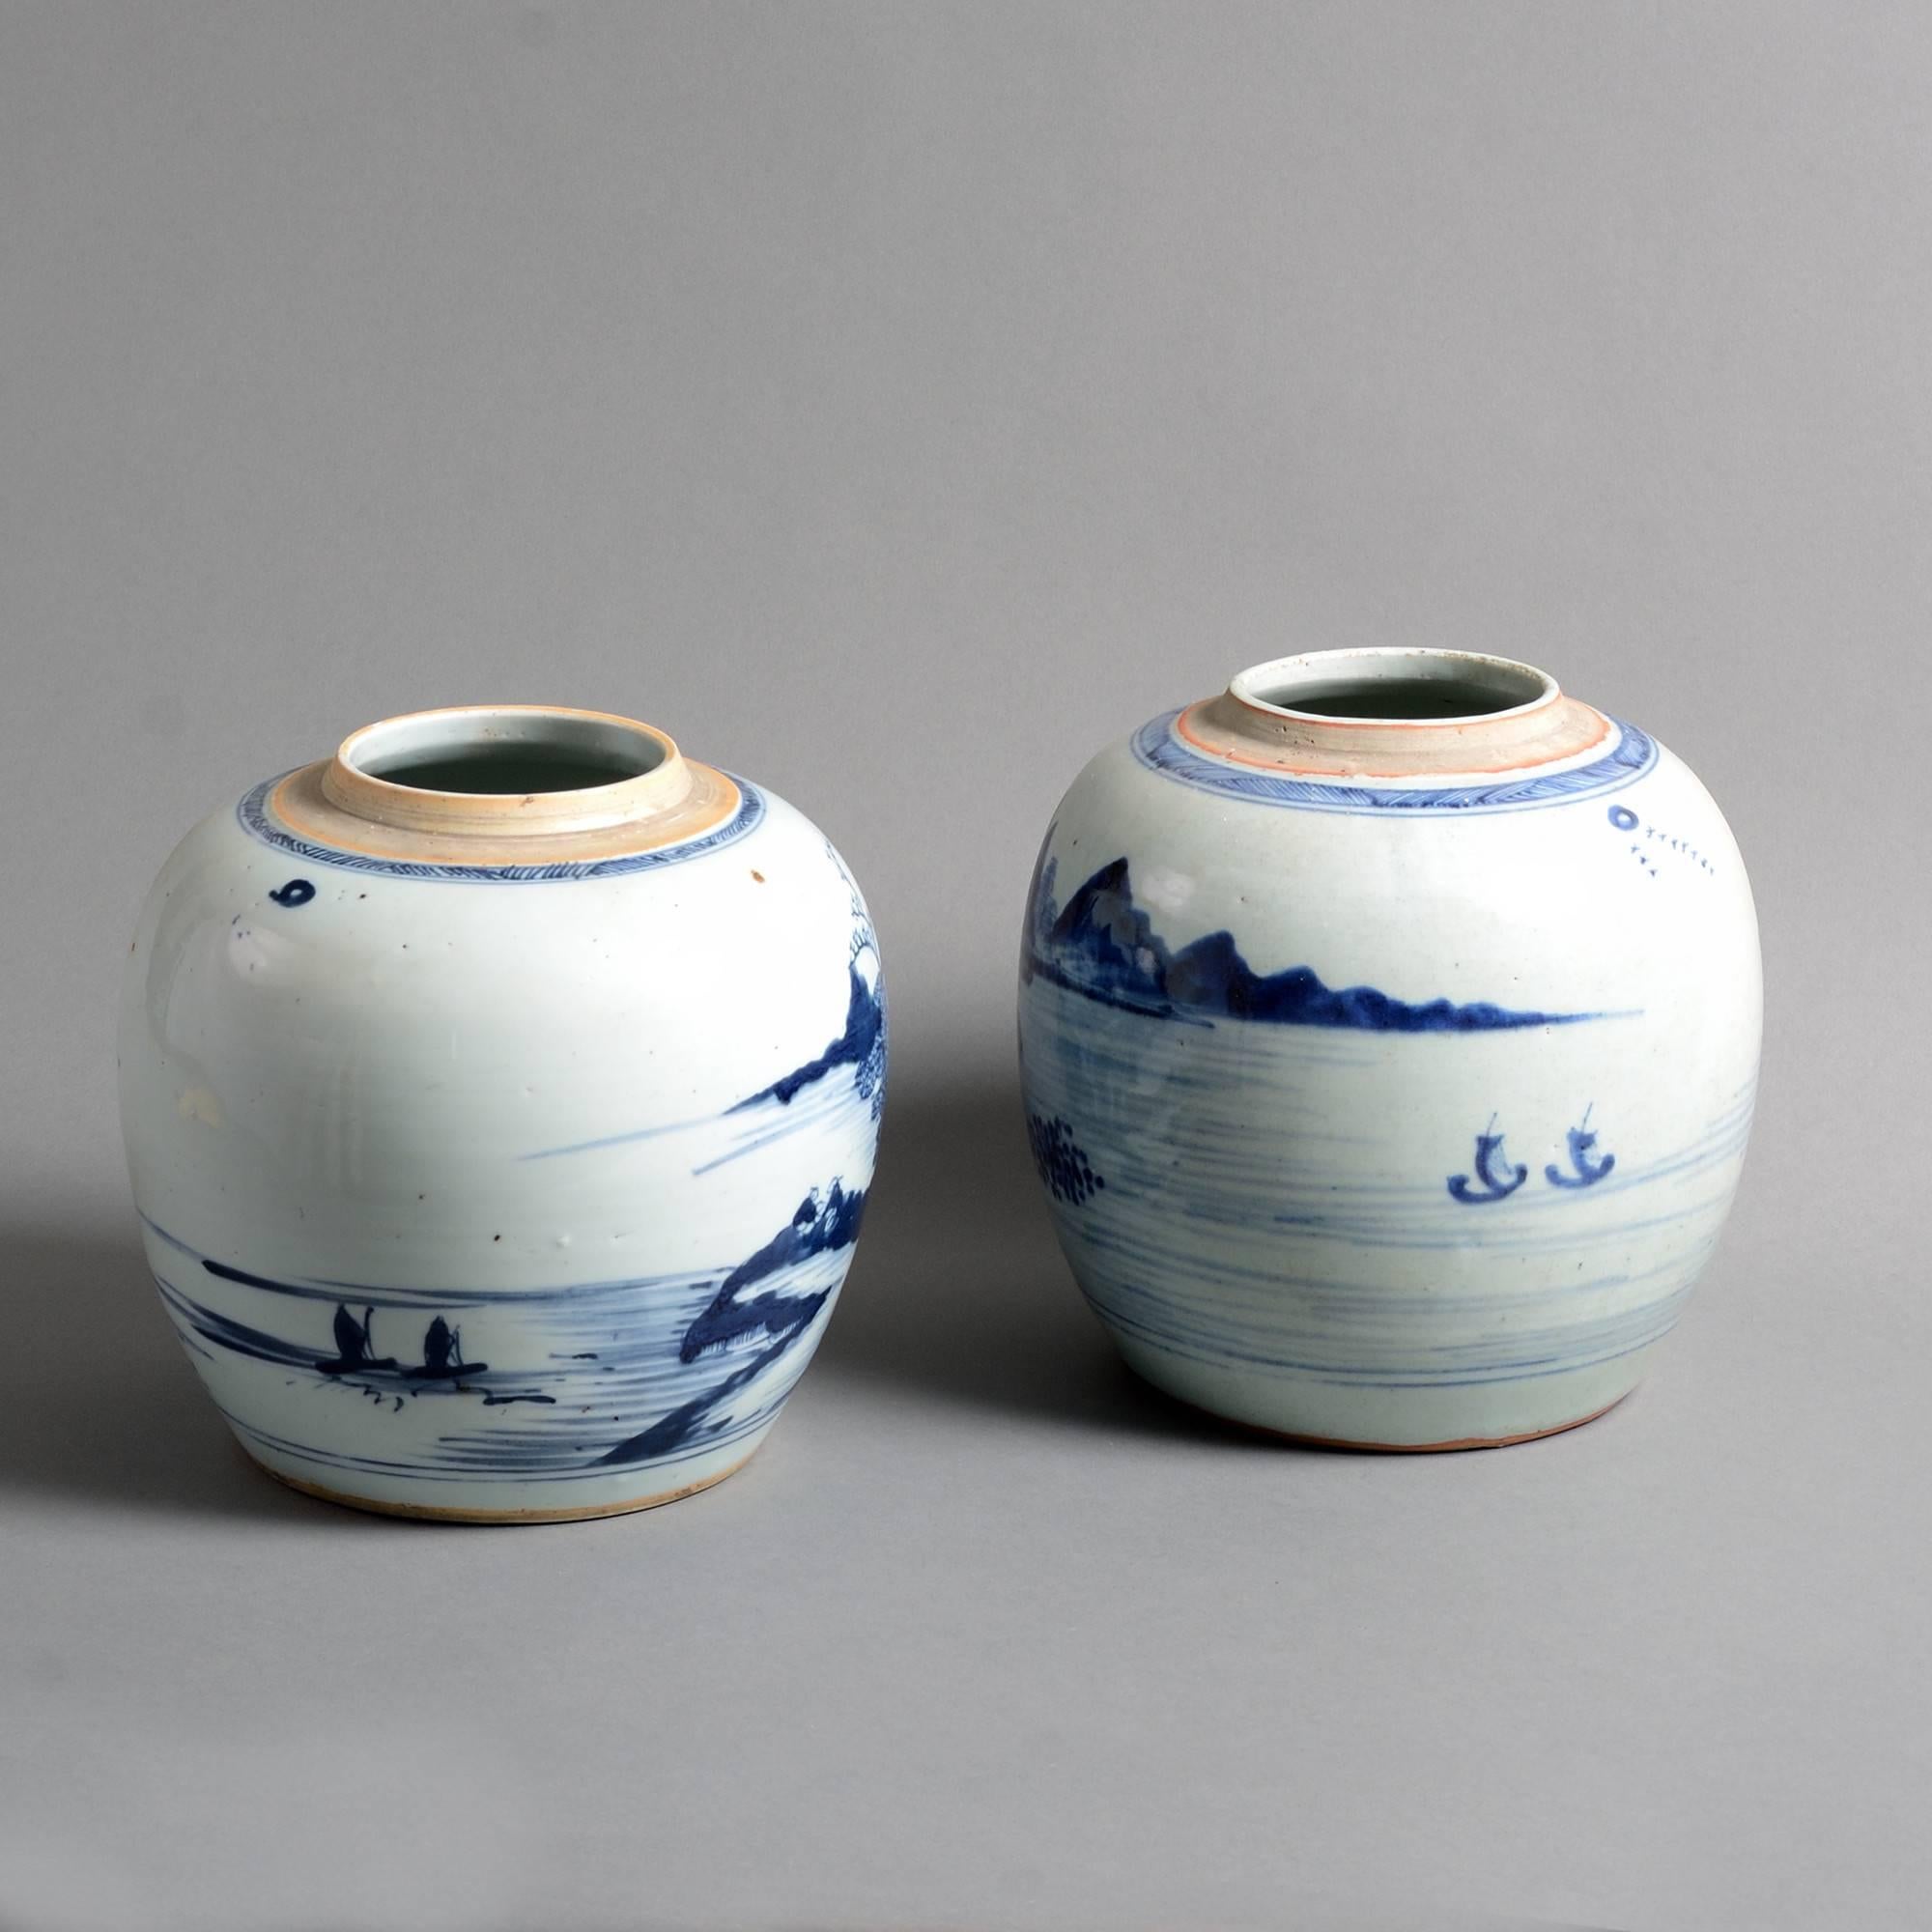 A pair of late 18th century blue and white glazed porcelain vase, each decorated with imaginary landscapes, seascapes and mountains with stylised figures in boats. 

Qing dynasty, Qianlong period.